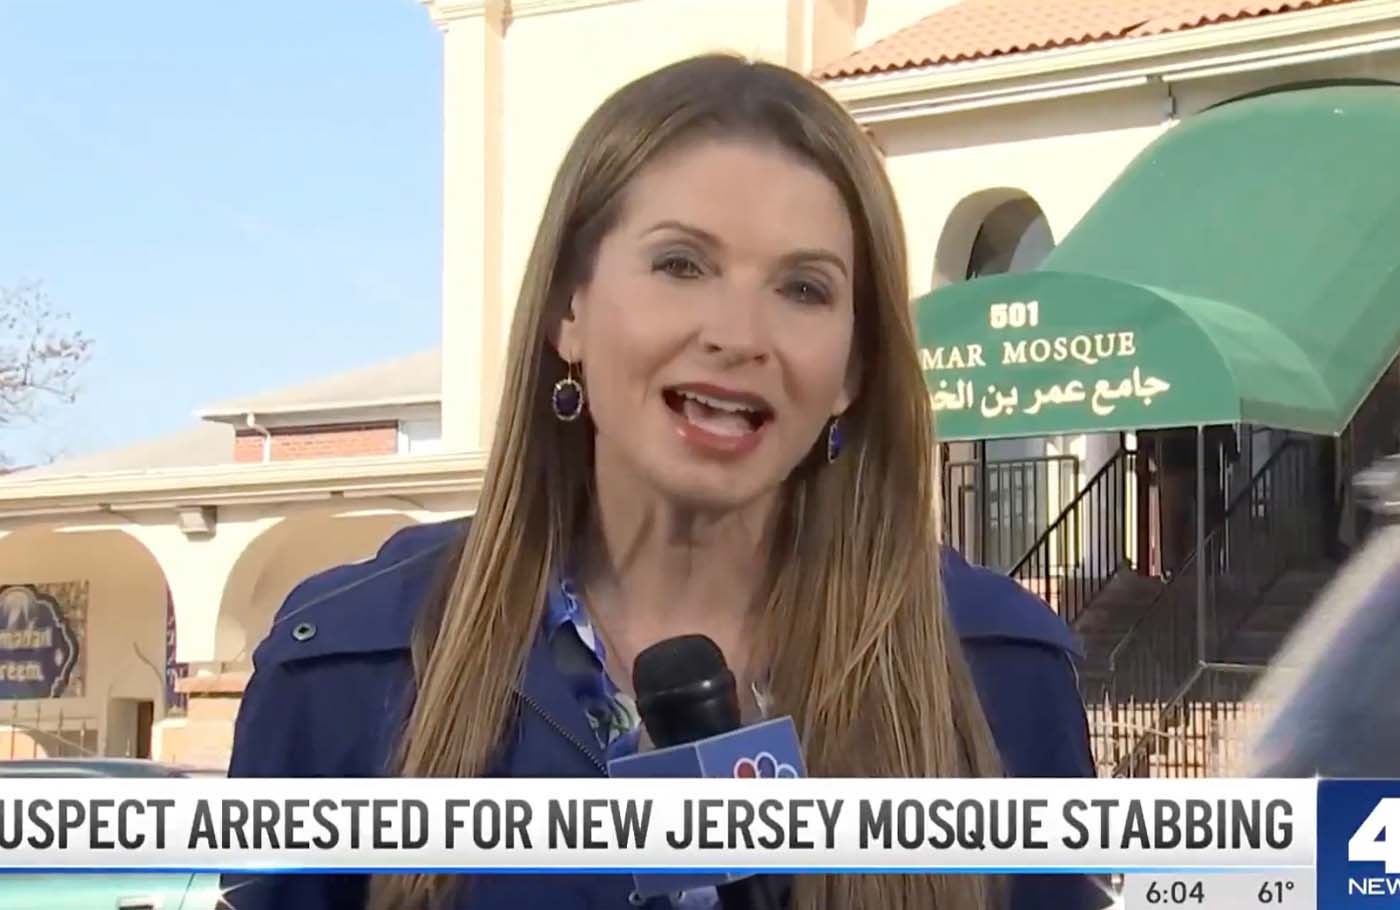 Suspect Arrested for New Jersey Mosque Stabbing